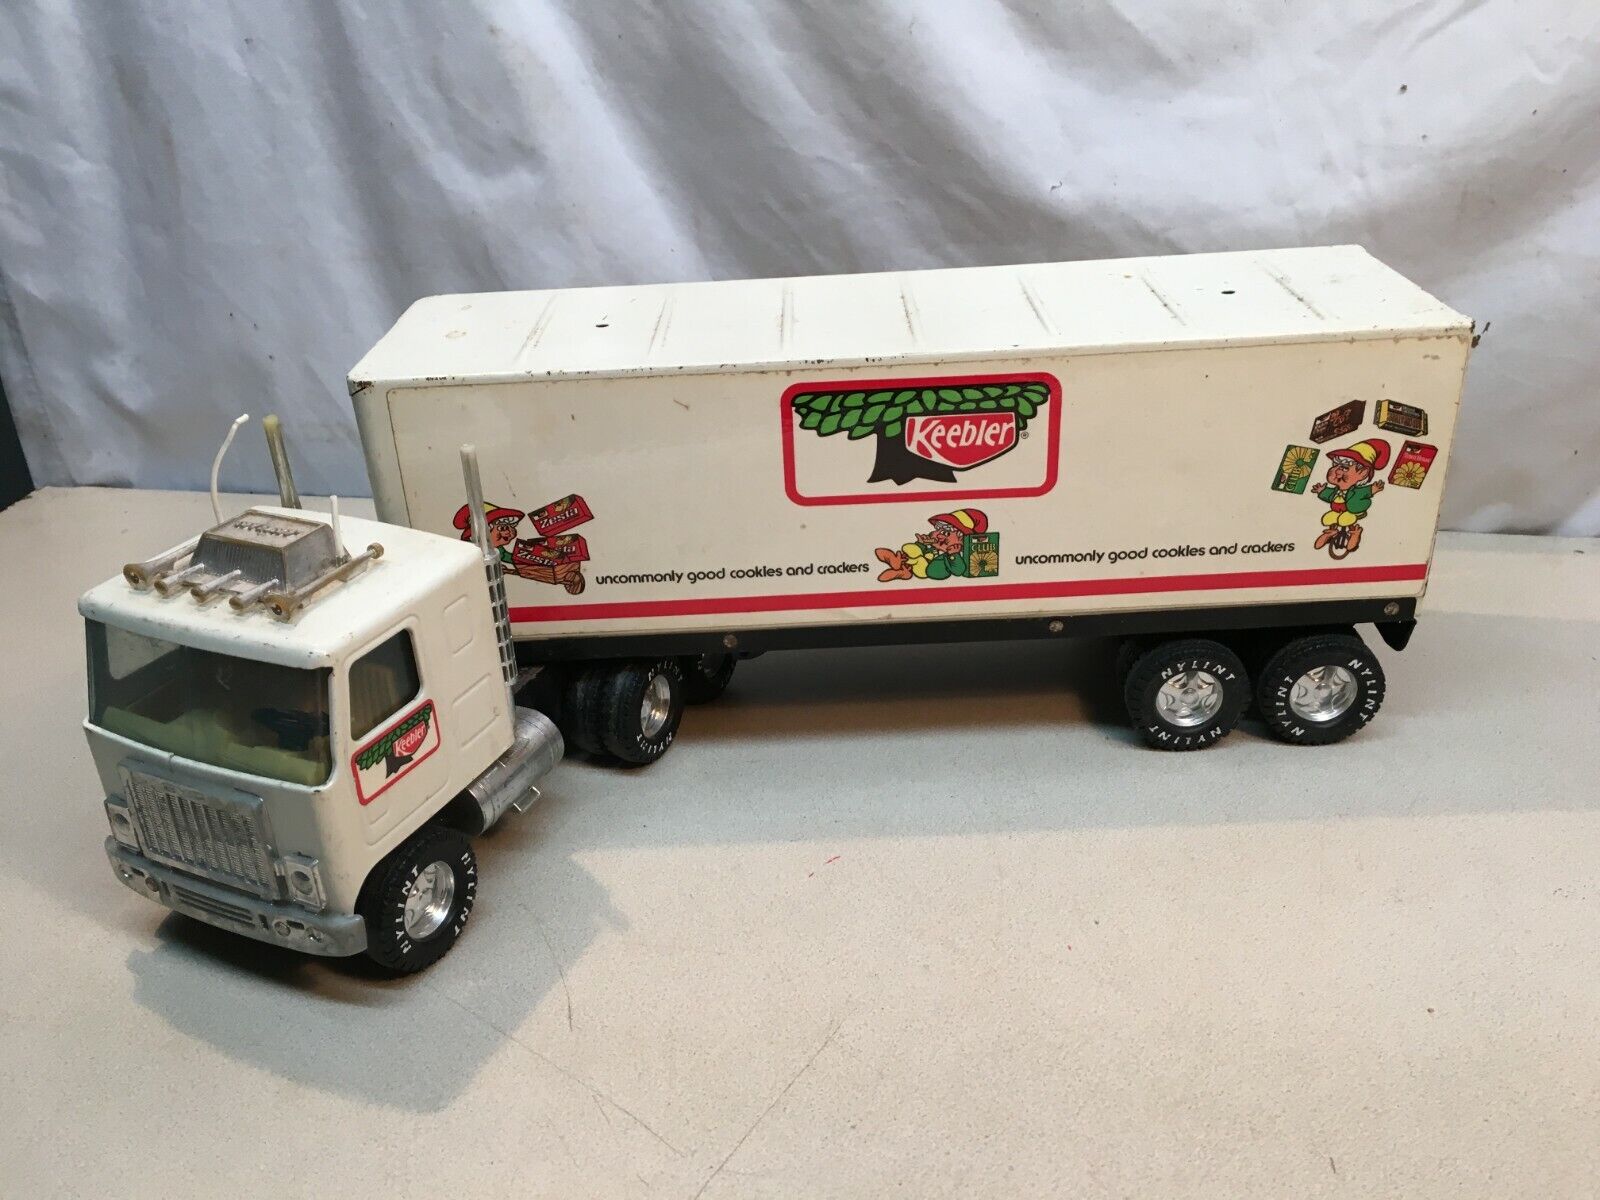 Vintage 1970s Ny Lint Toy Semi Big Rig Truck Keebler Cookies and Crackers advert